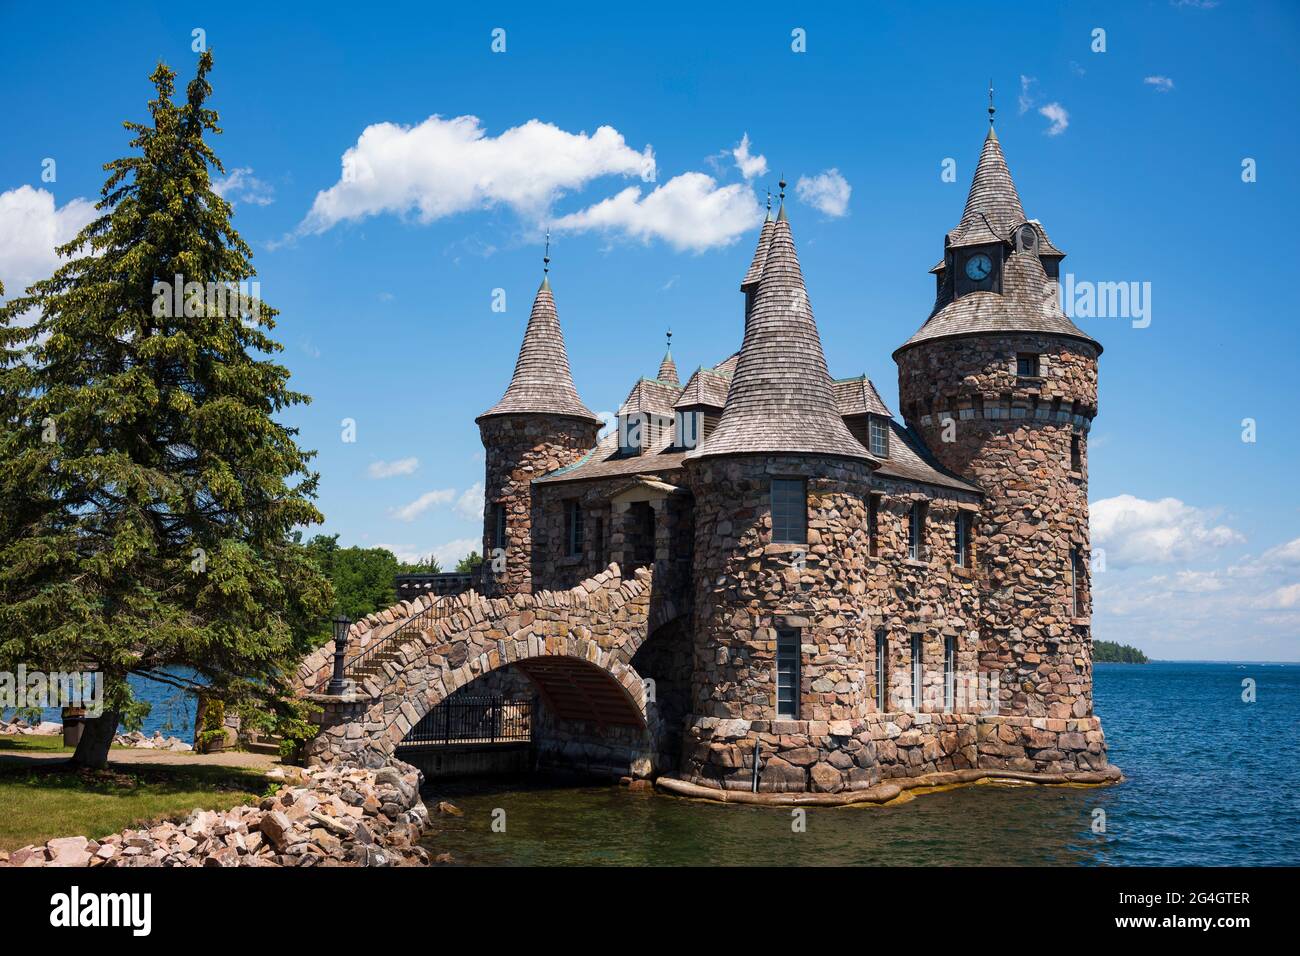 The power house of Boldt Castle, a major landmark and tourist attraction, is located in the Thousand Islands region of New York on Heart Island in the Stock Photo